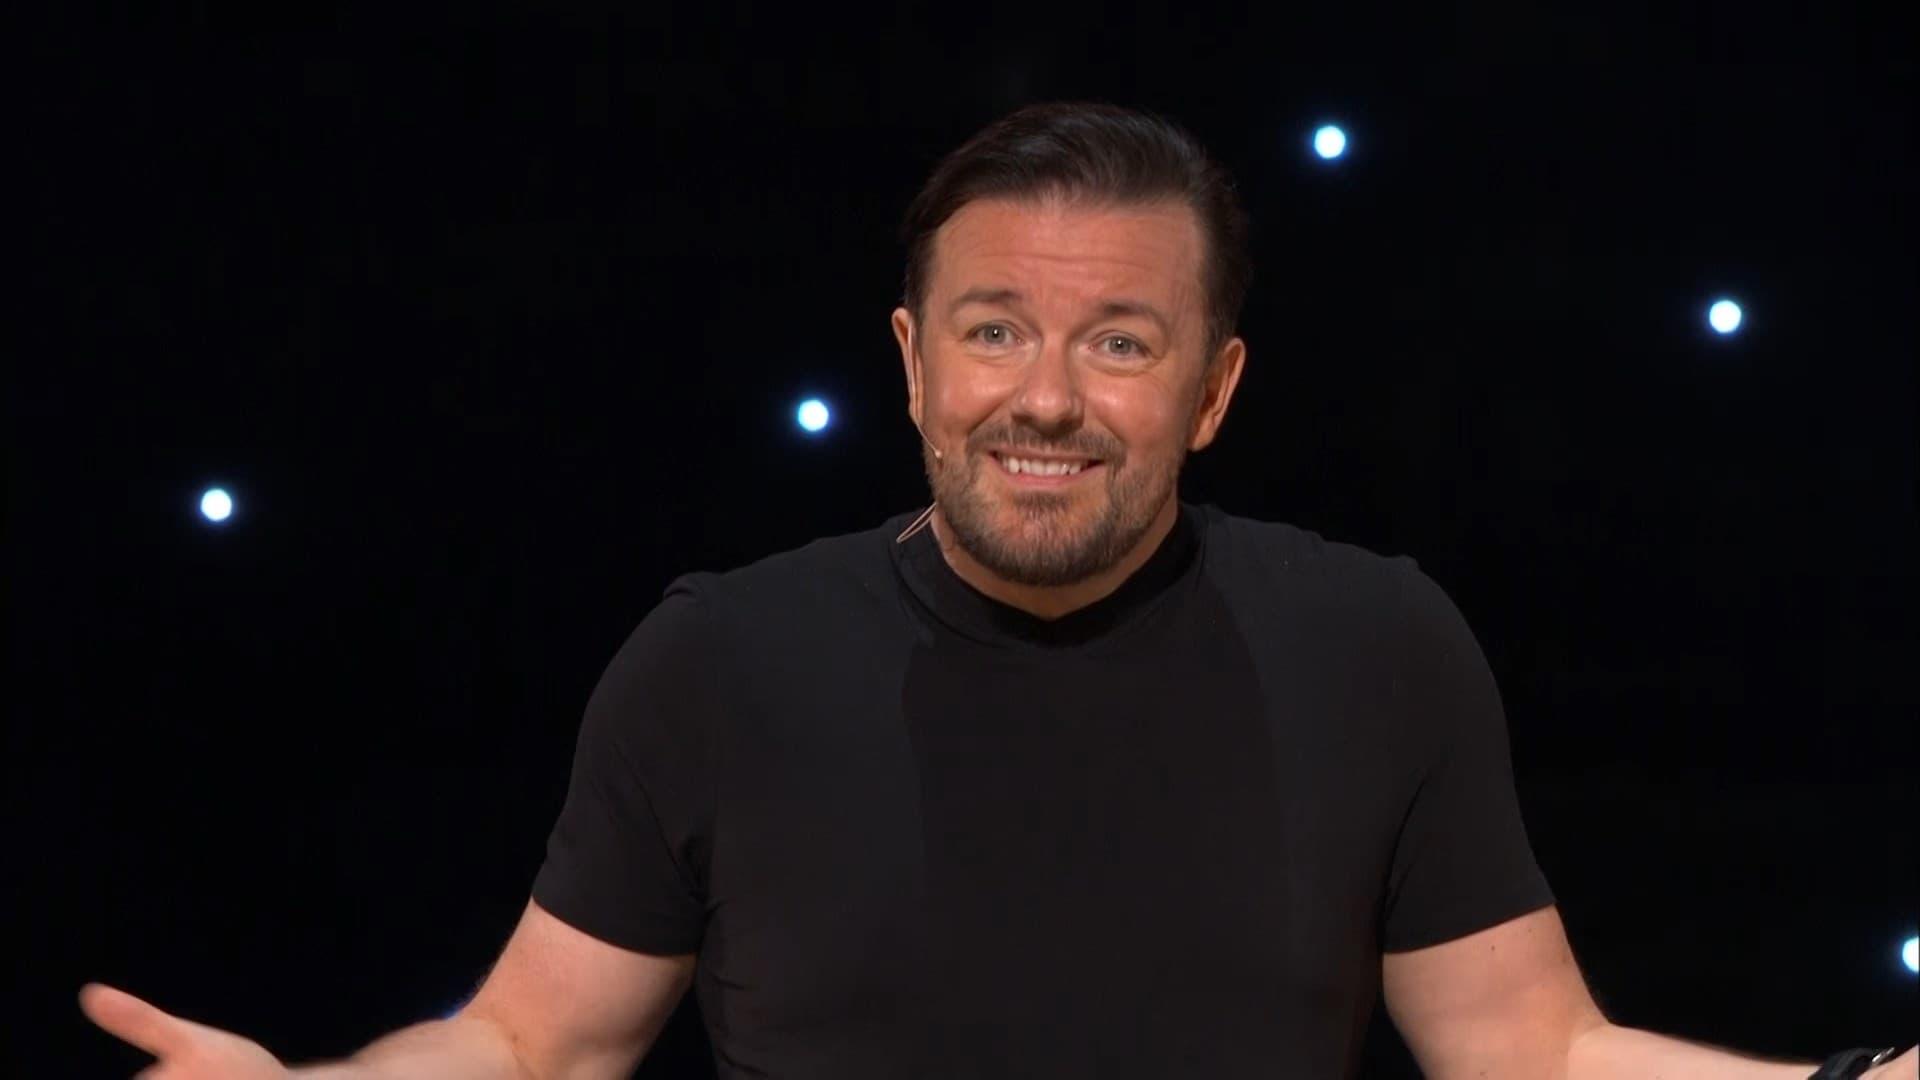 Ricky Gervais: Out of England 2 backdrop